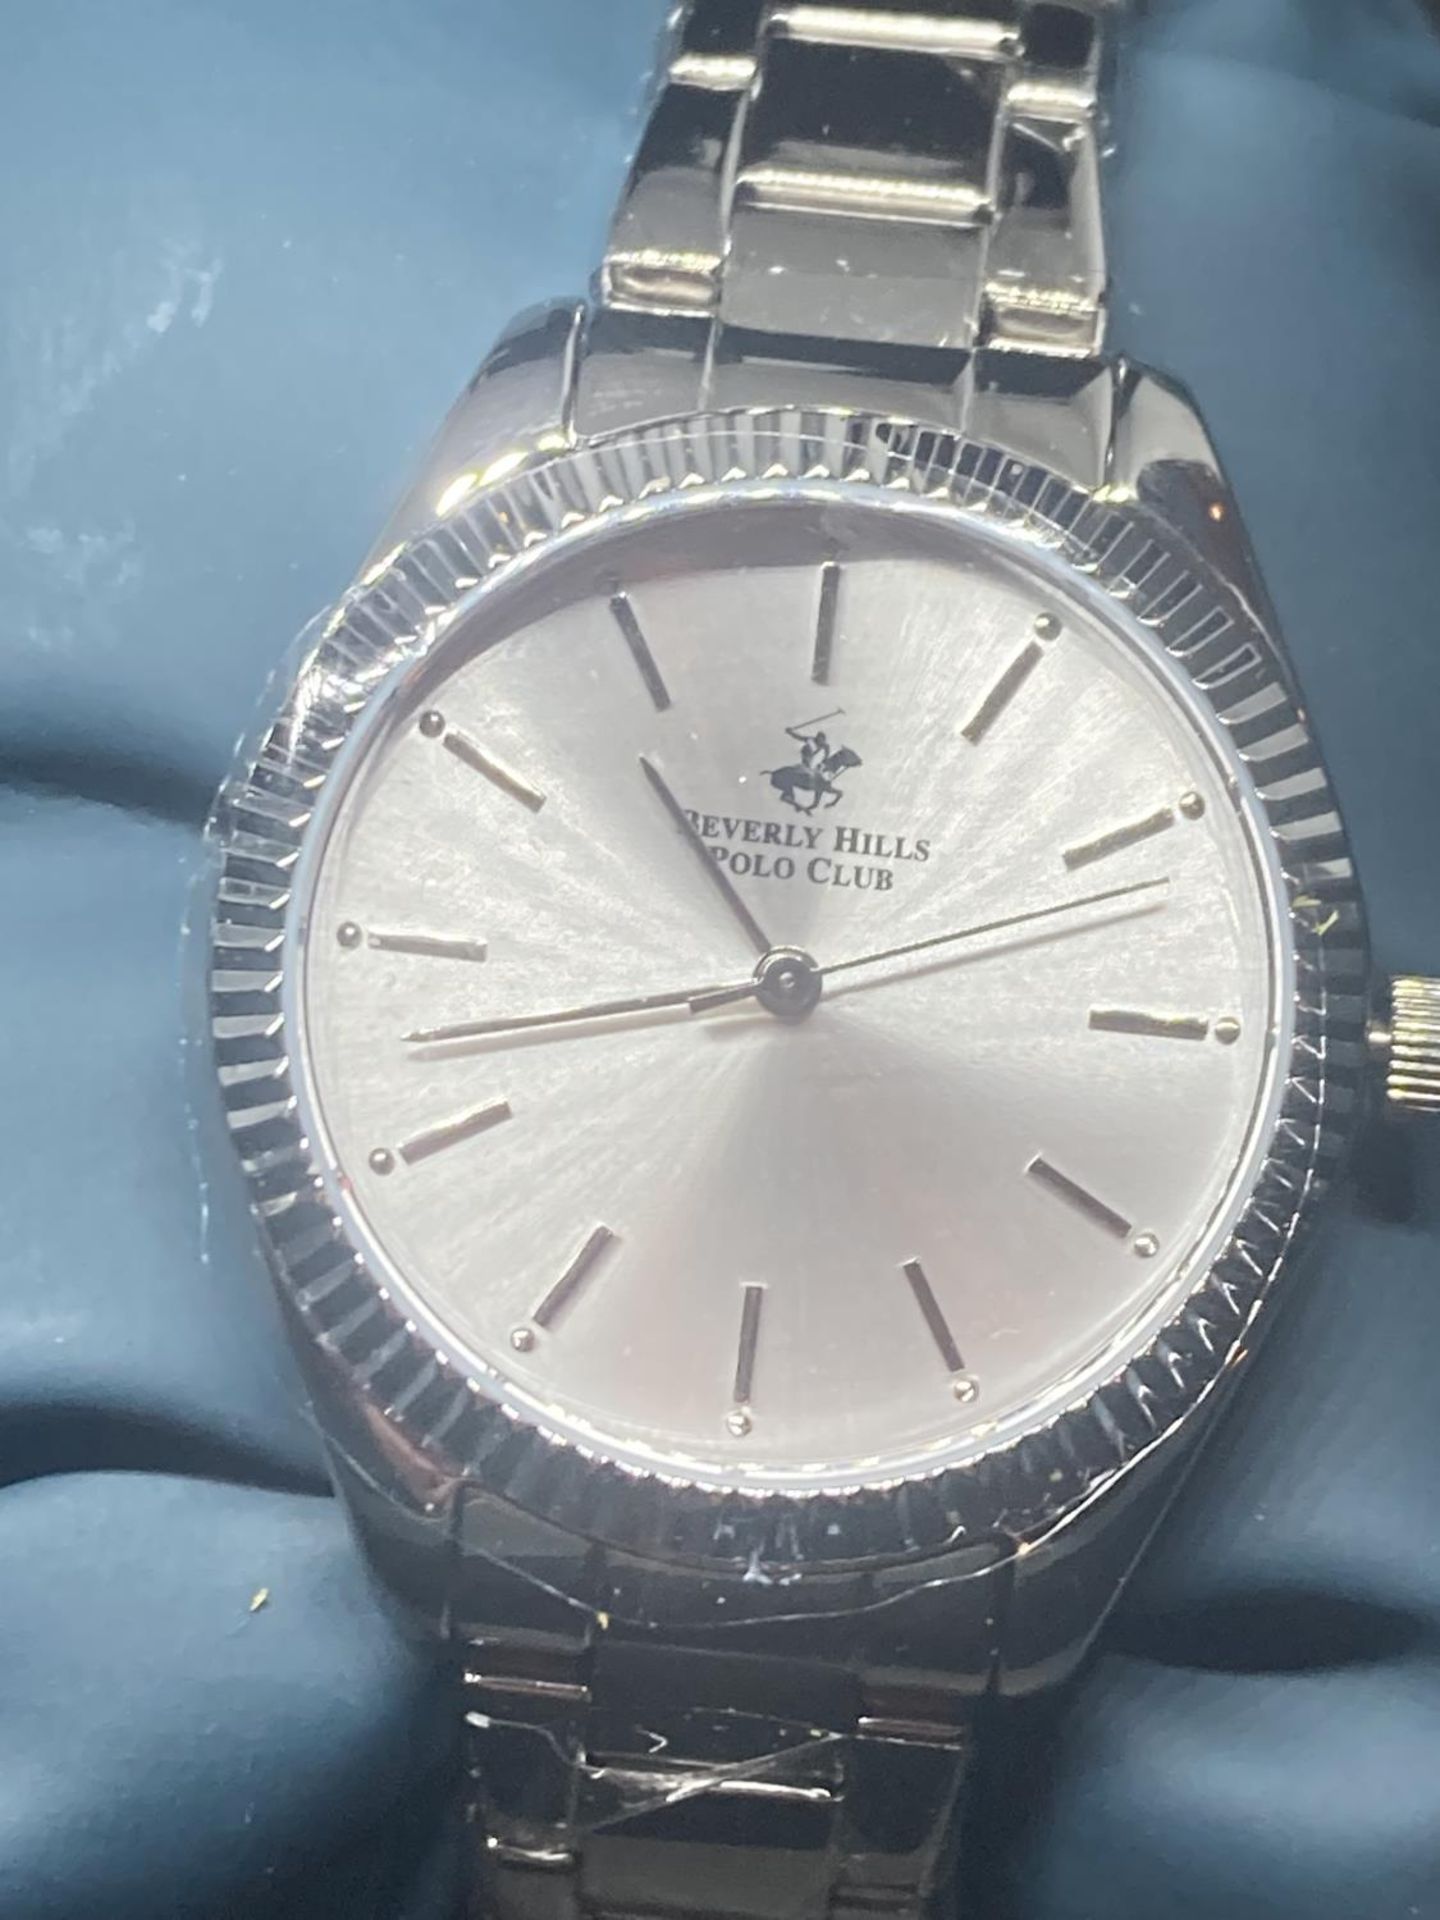 AN AS NEW AND BOXED BEVERLEY HILLS POLO CLUB WRIST WATCH SEEN WORKING BUT NO WARRANTY - Image 3 of 10